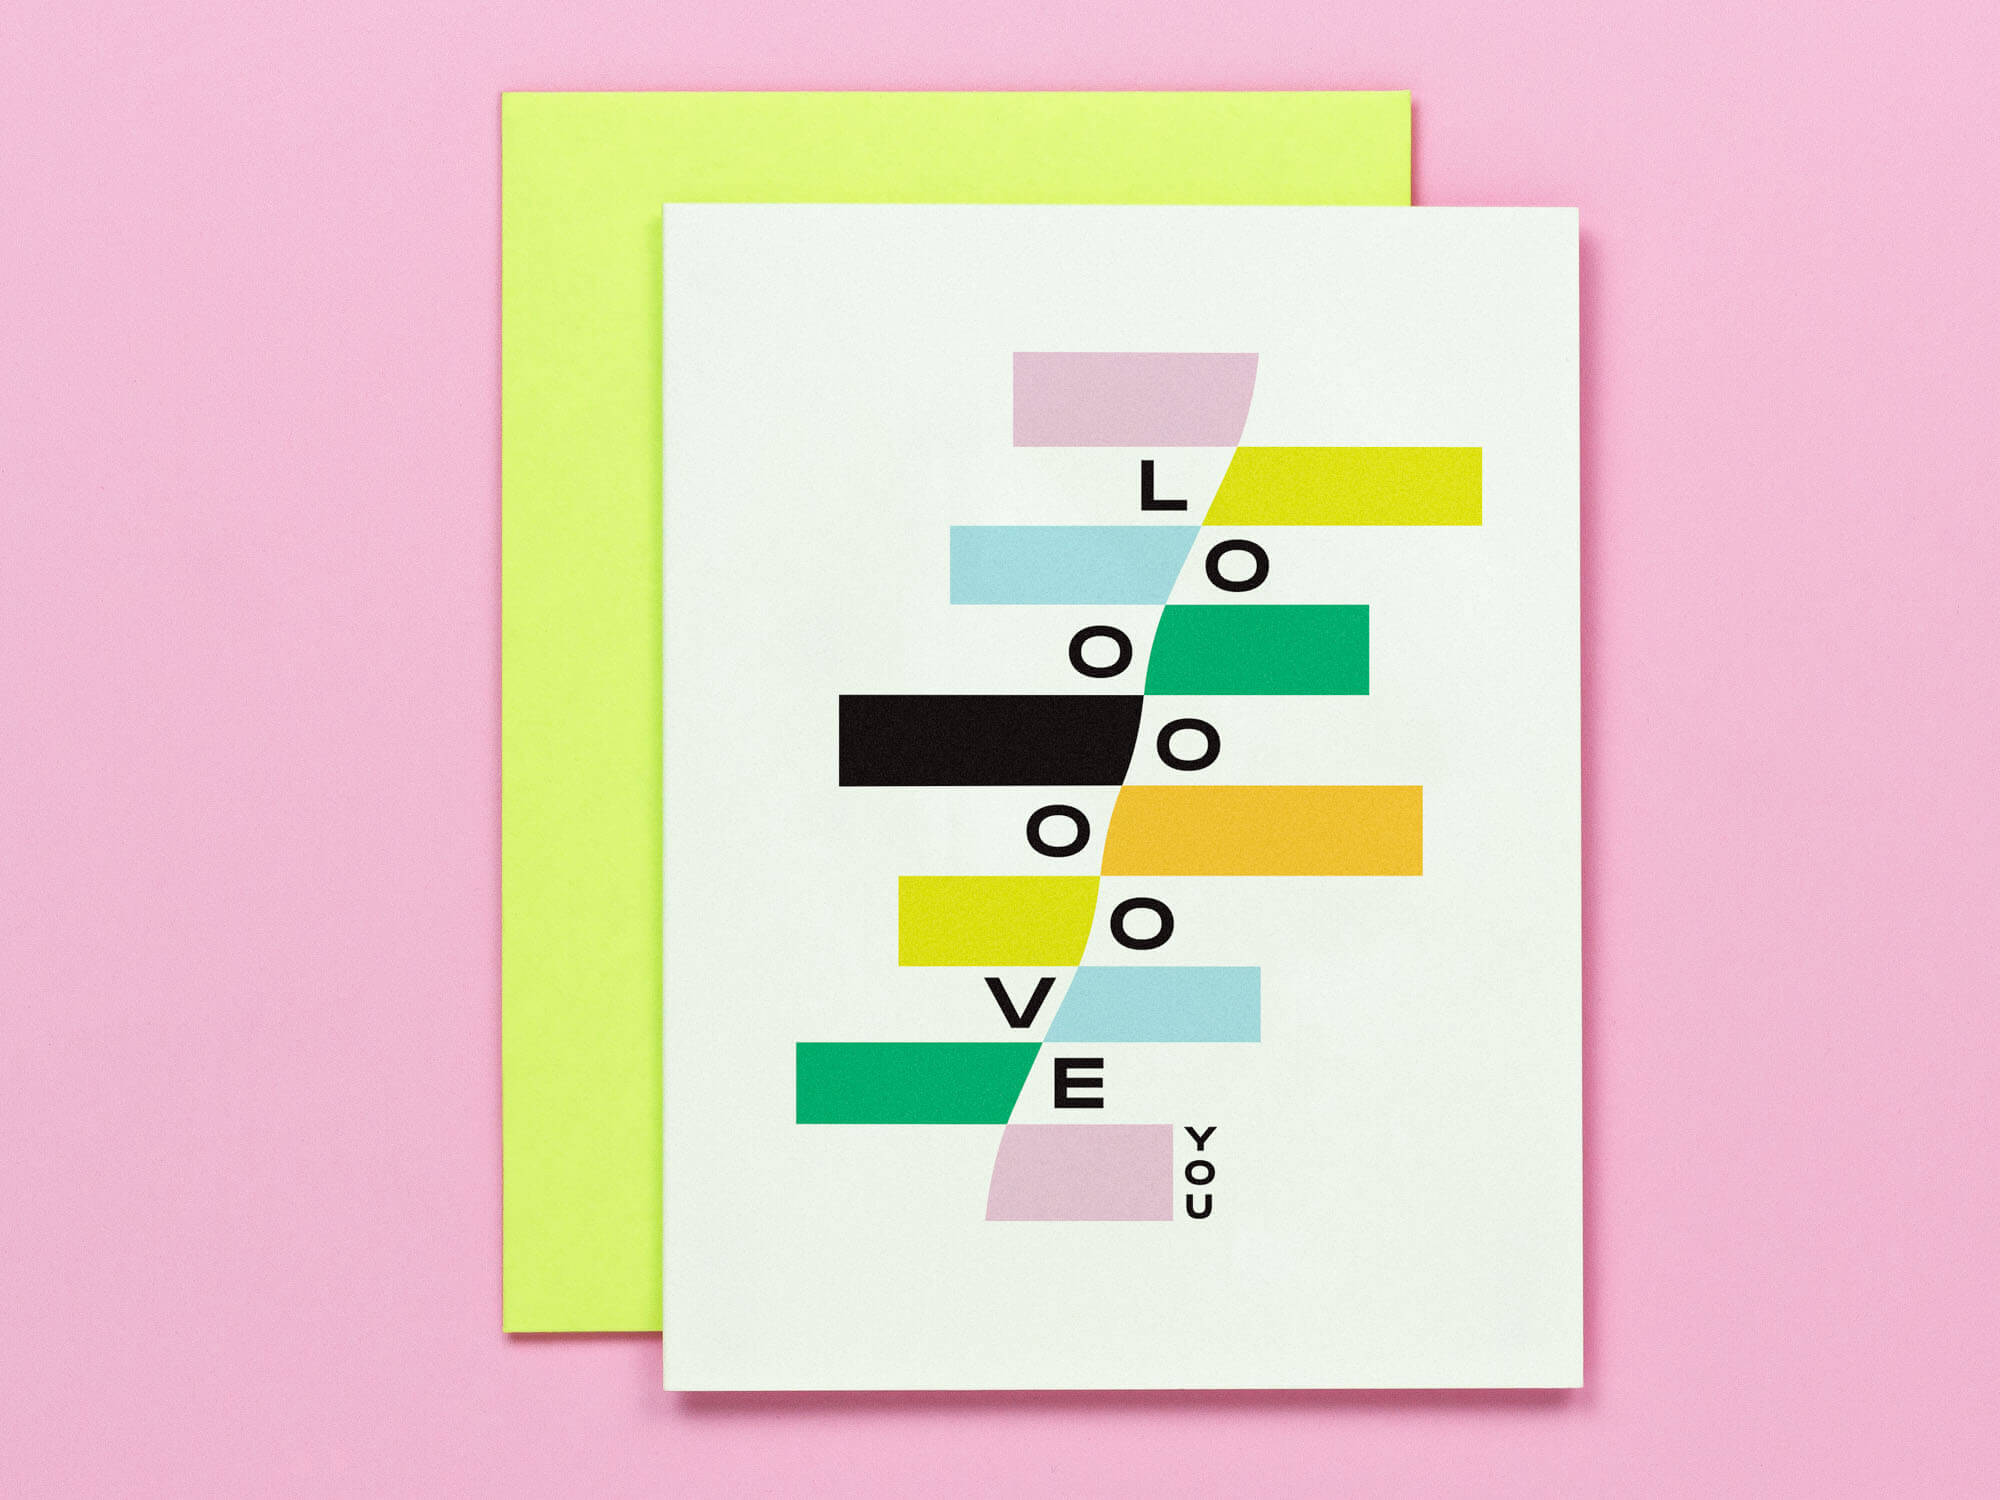 "Love You" love or friendship card designed with abstract stair step pattern in pastel hues with black and white accents. Inspired in part by the art of Wassily Kandinsky. Made in USA by My Darlin' @mydarlin_bk